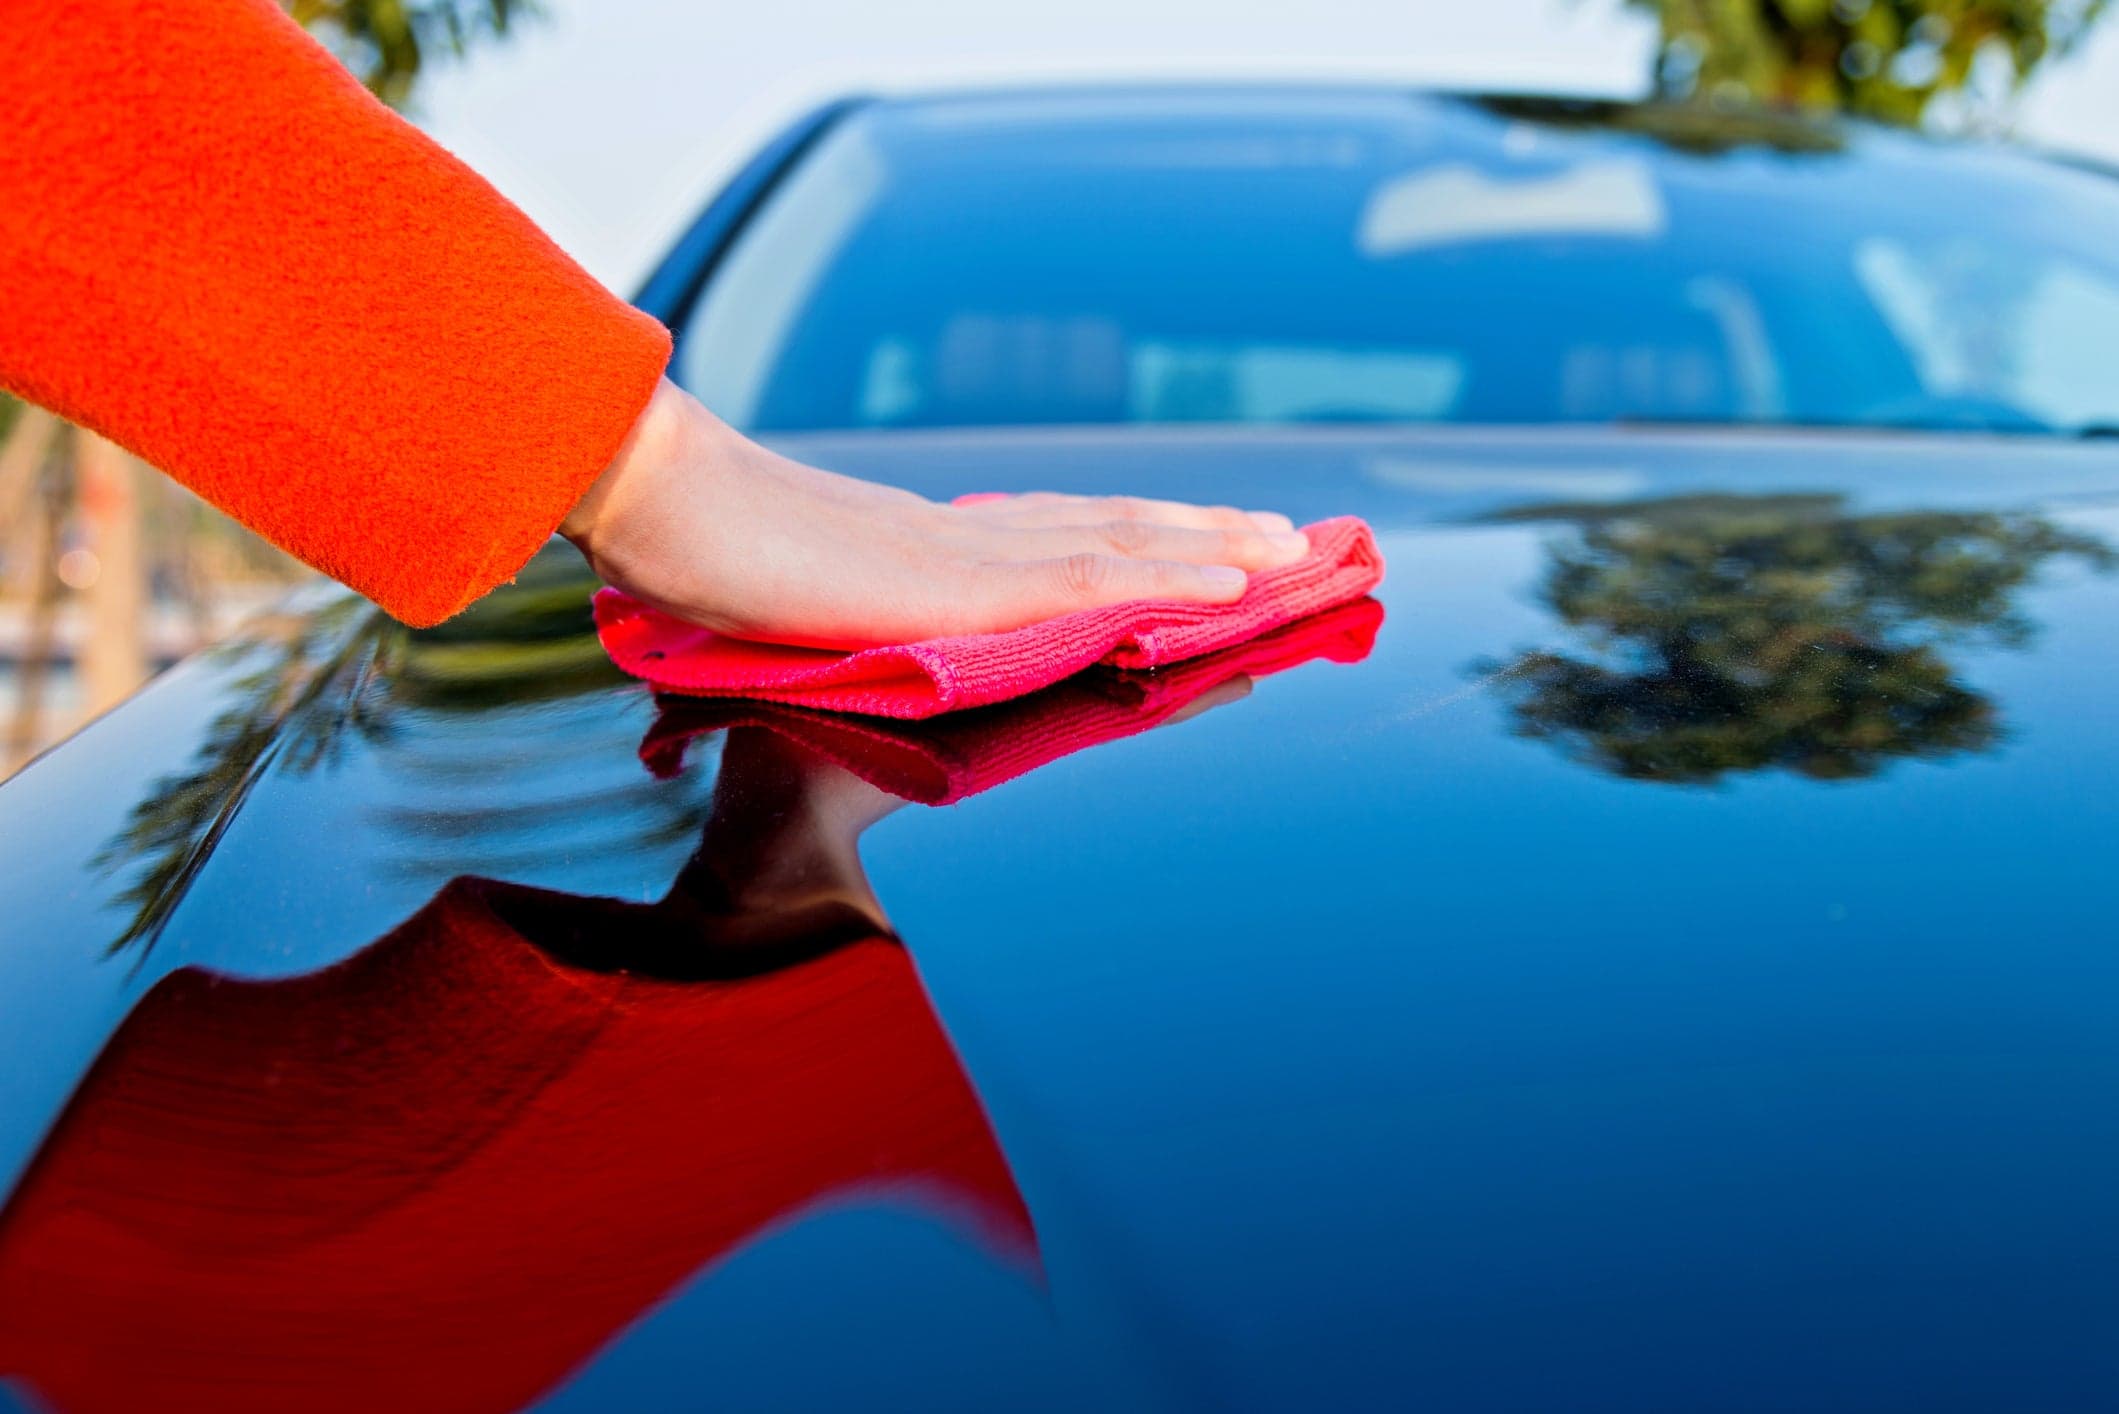 Best Waterless Car Wash: Get a Good Wash Without Getting Wet